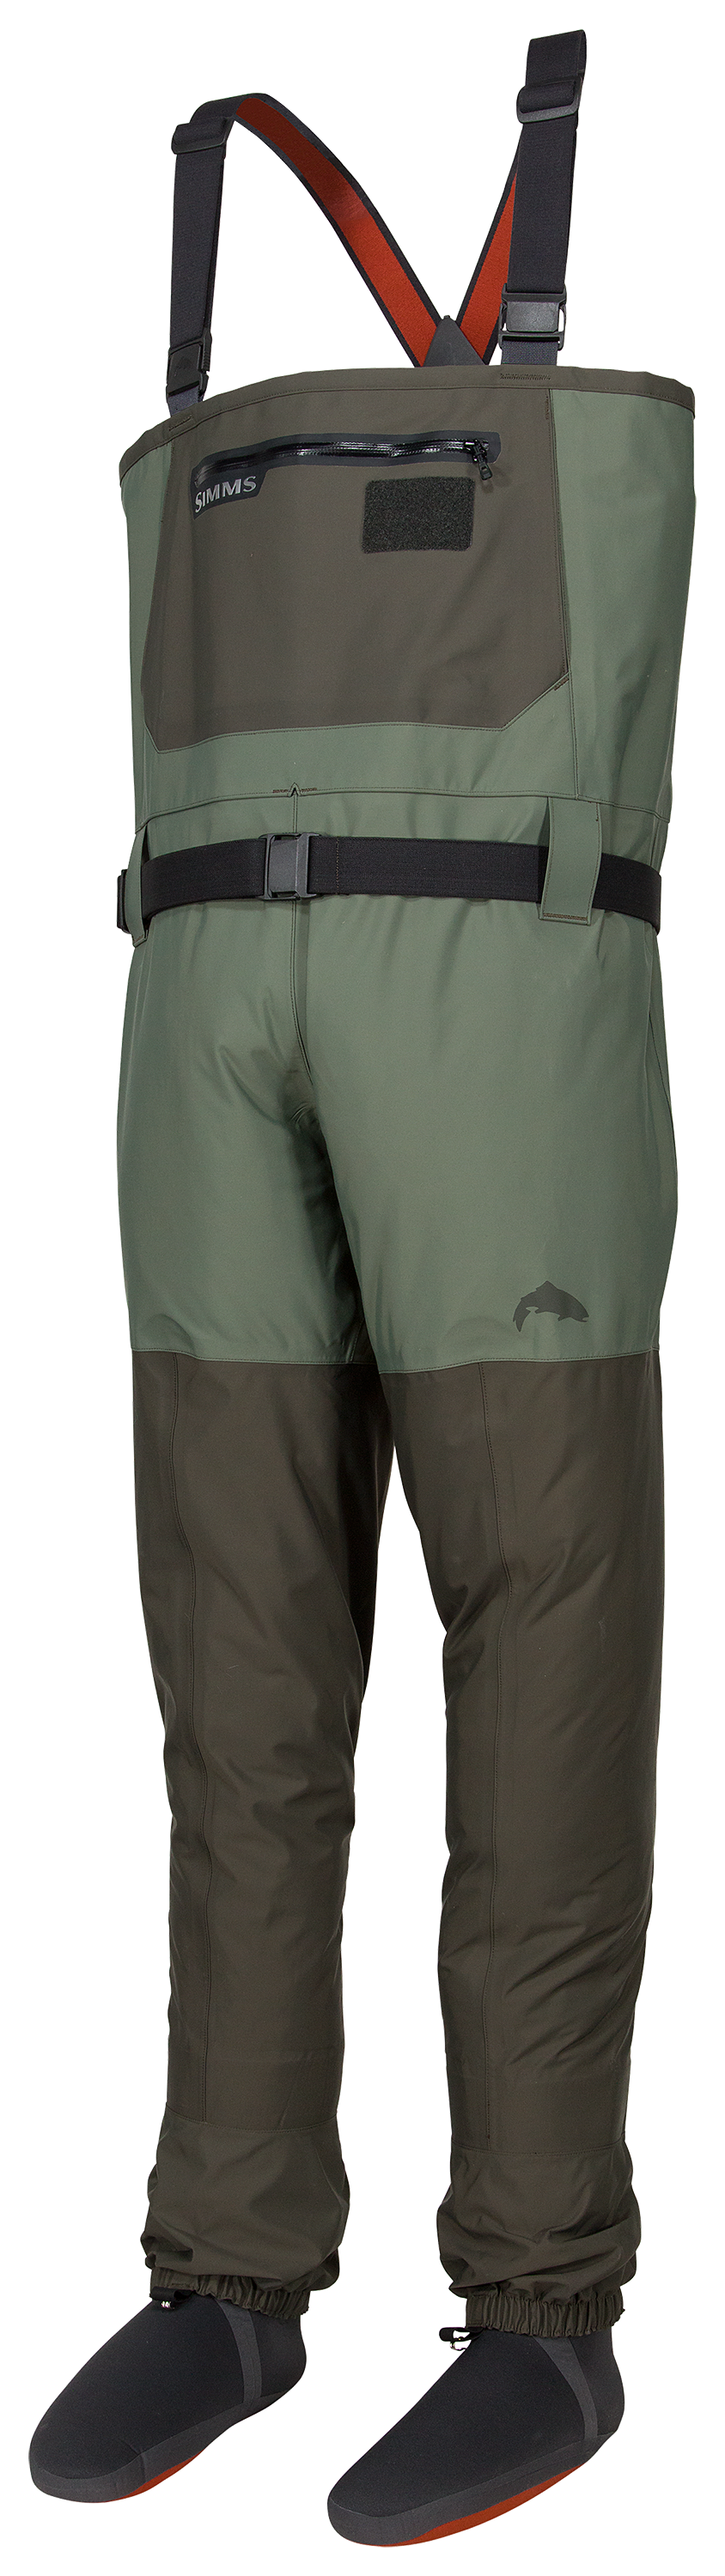  Simms Freestone Z Mens Fishing Waders, Waterproof Chest  Stockingfoot Waders w/Gravel Guards, Front Zipper, 4-Layer Breathable,  Hunting and Fly Fishing Waders, Smoke, Small 7-8 Foot : Sports & Outdoors